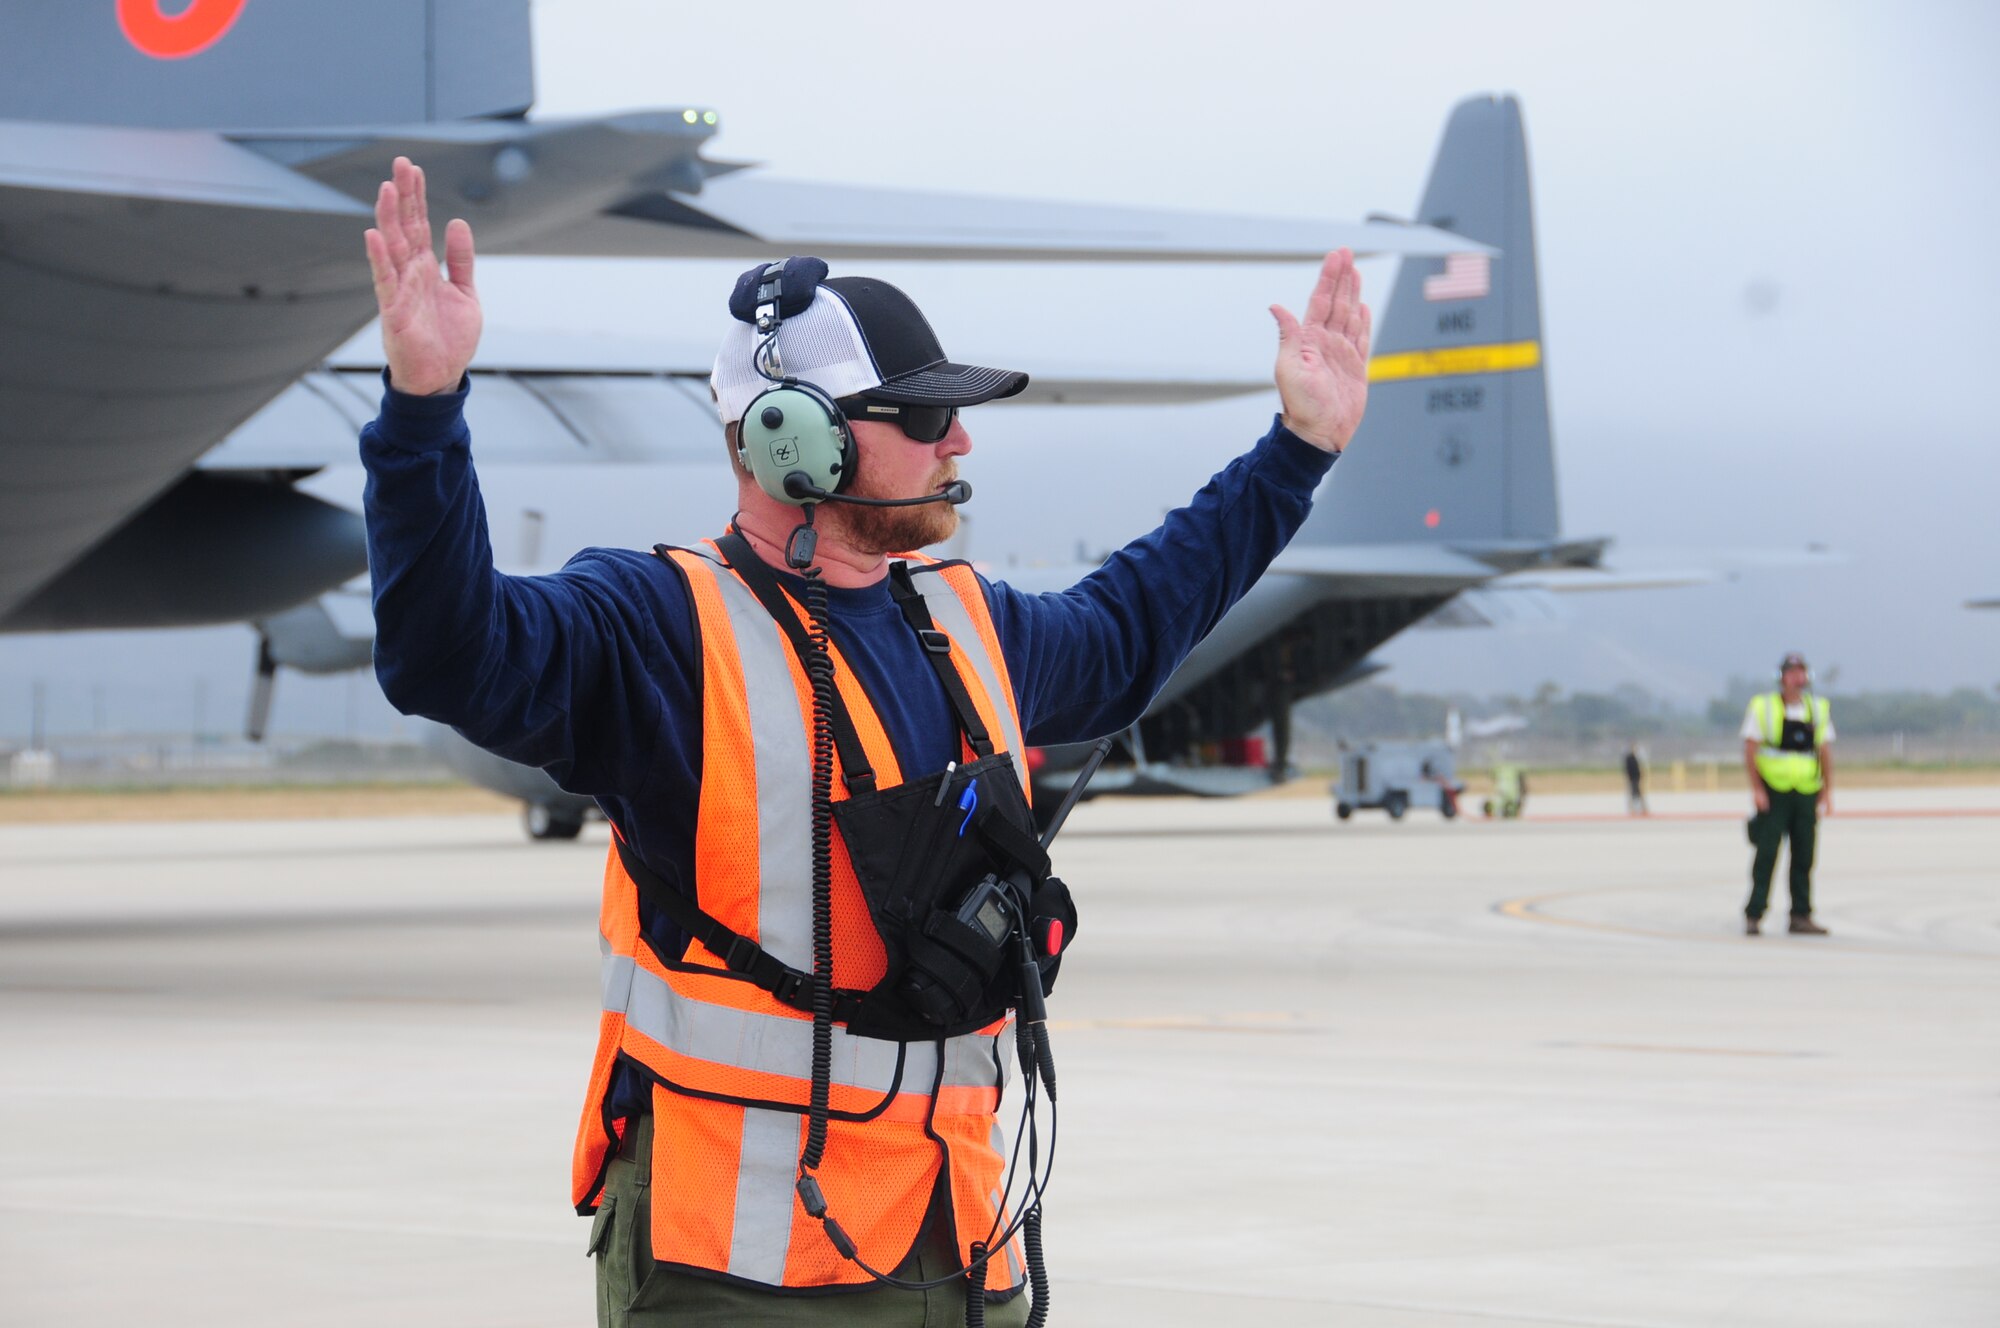 Assistant Tank Manager John Price from Gateway Tanker Base in Mesa, Arizona helps to direct a C-130 taxi out during MAFFS training at the 146th Airlift Wing in Port Hueneme, California on May 4, 2016. Air National Guard and Reserve units from across the U.S. convened for MAFFS (Modular Airborne Fire Fighting Systems)annual certification and training this week to prepare for the upcoming fire season in support of U.S. Forest Service. (U.S. Air National Guard photo by Senior Airman Madeleine Richards/Released)
